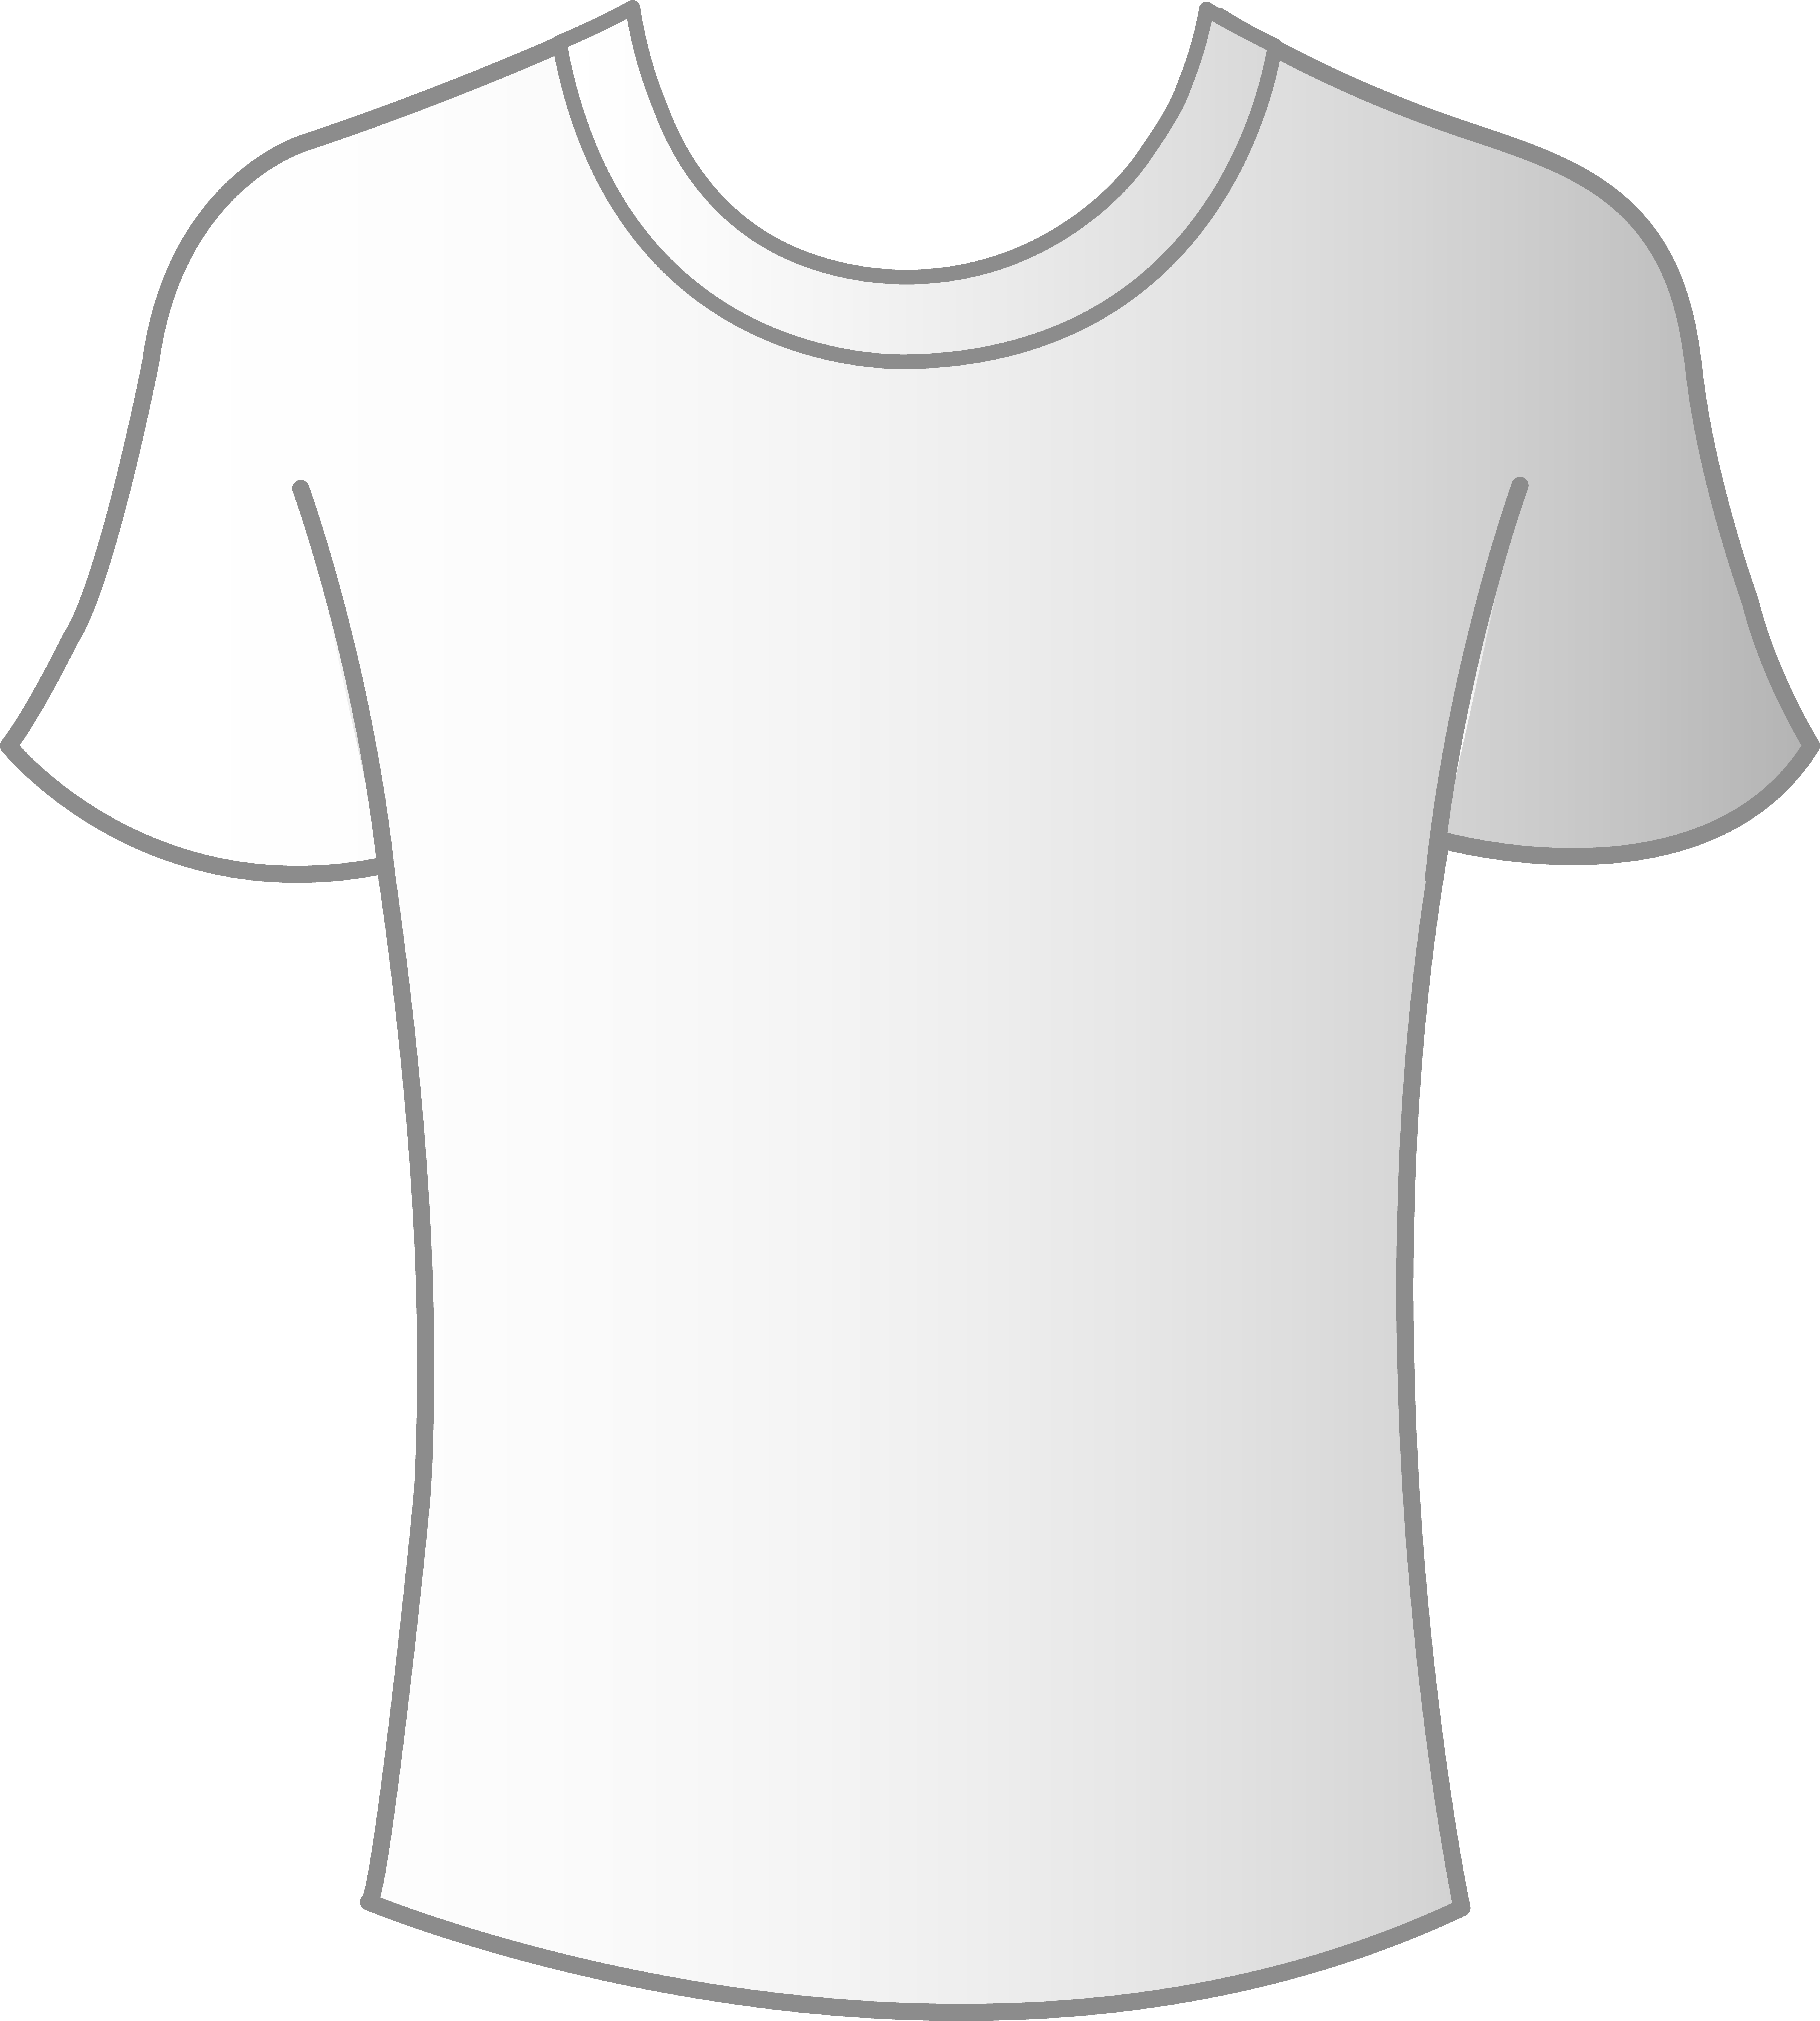 Best Photos of White Male T-Shirt Template - T-Shirt Template ...